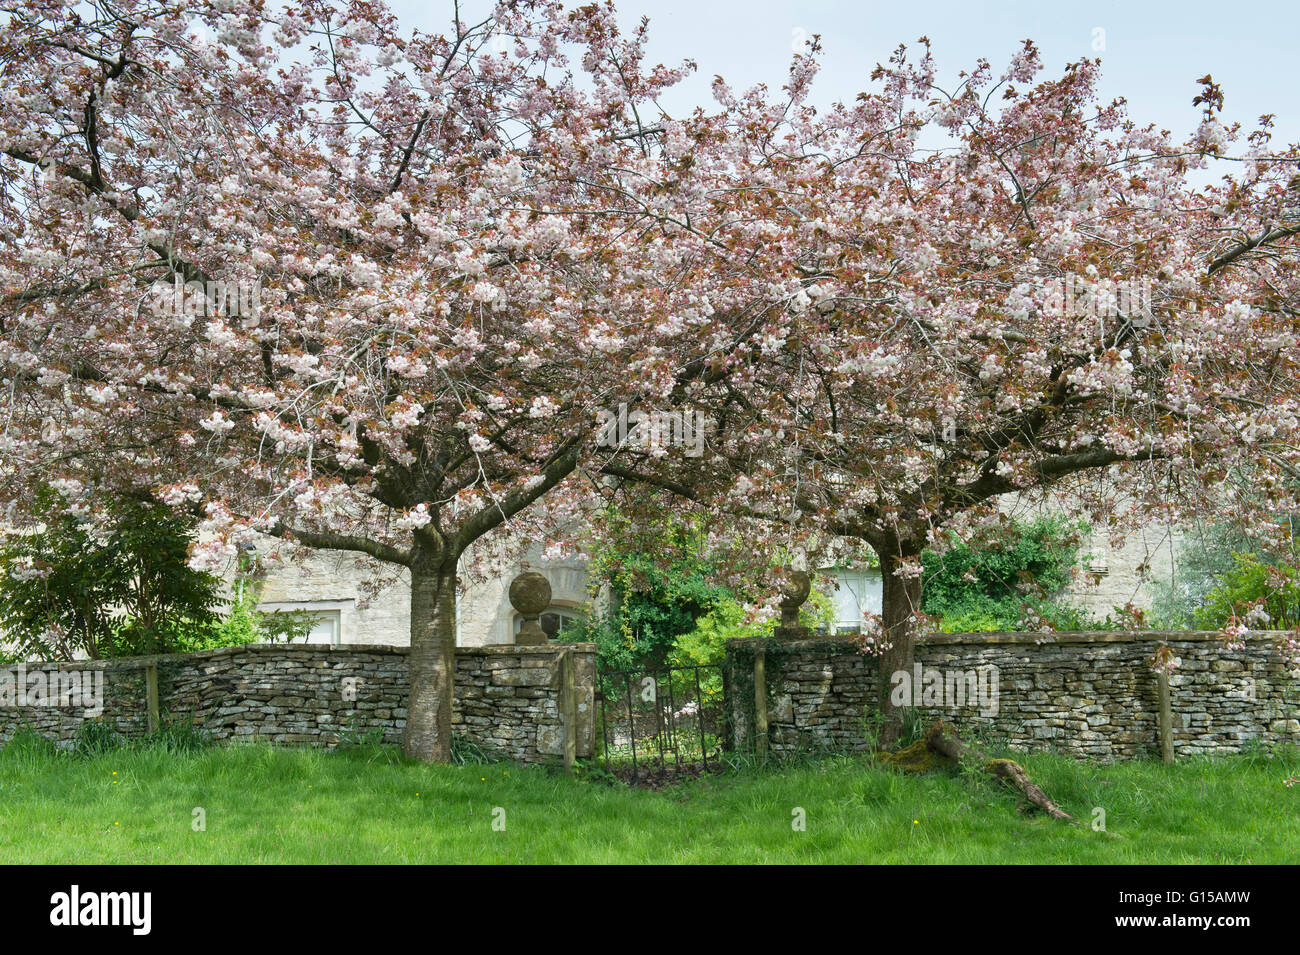 Prunus. Cherry trees in blossom next to a wrought iron garden gate in Swinbrook, Oxfordshire, England Stock Photo